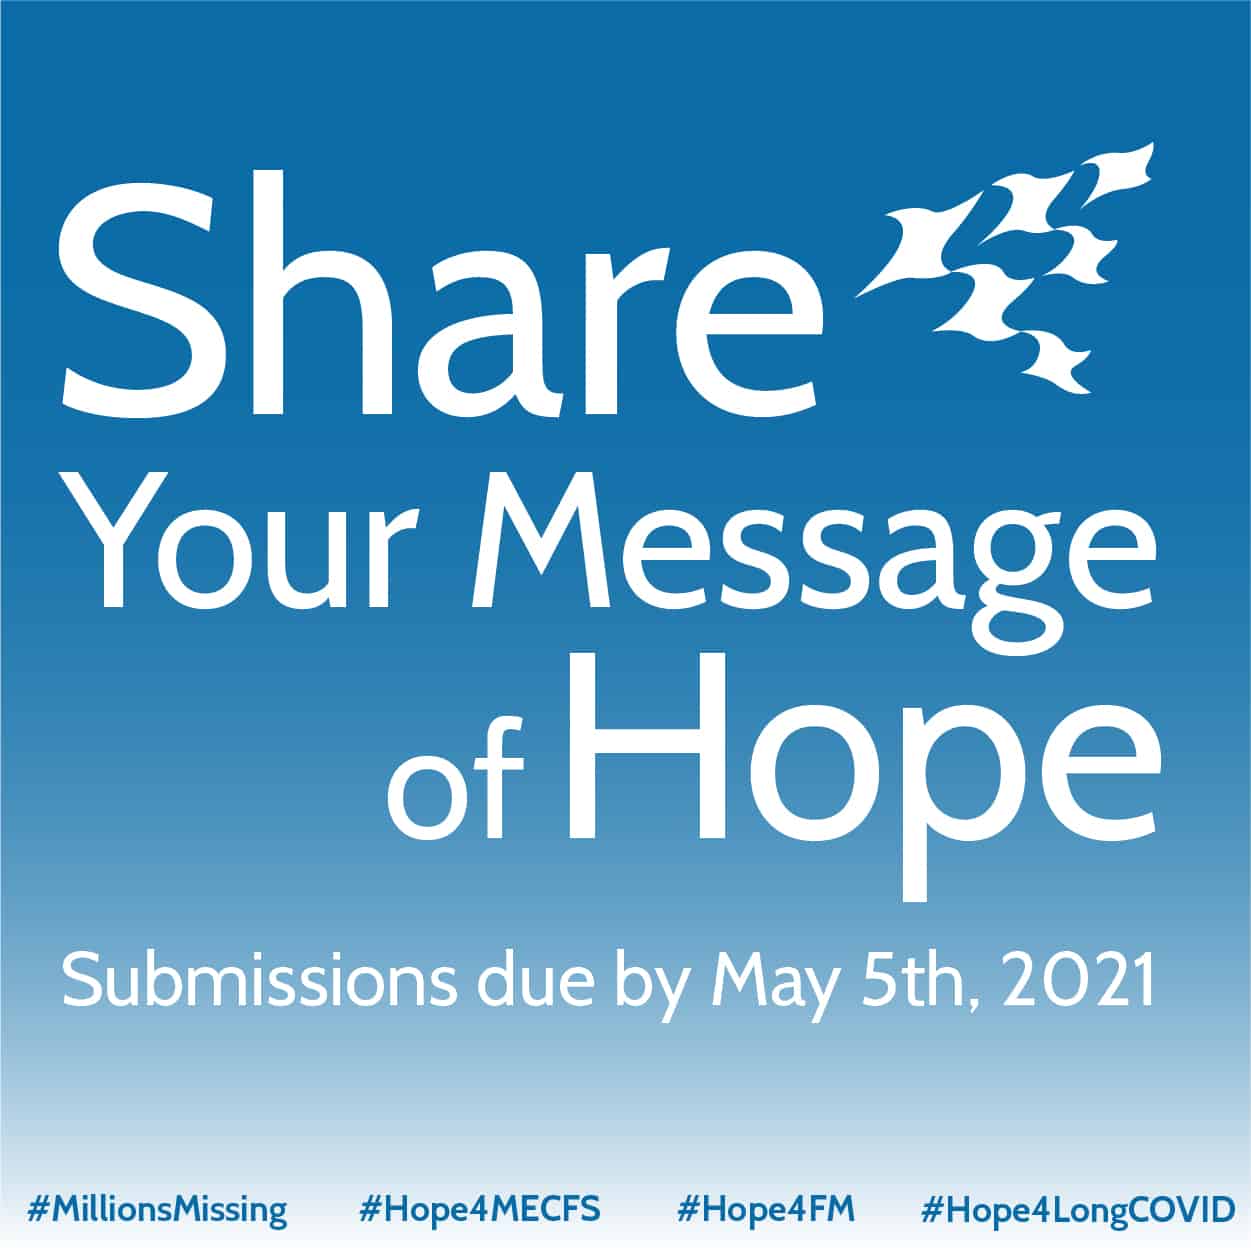 Share Your Message of Hope